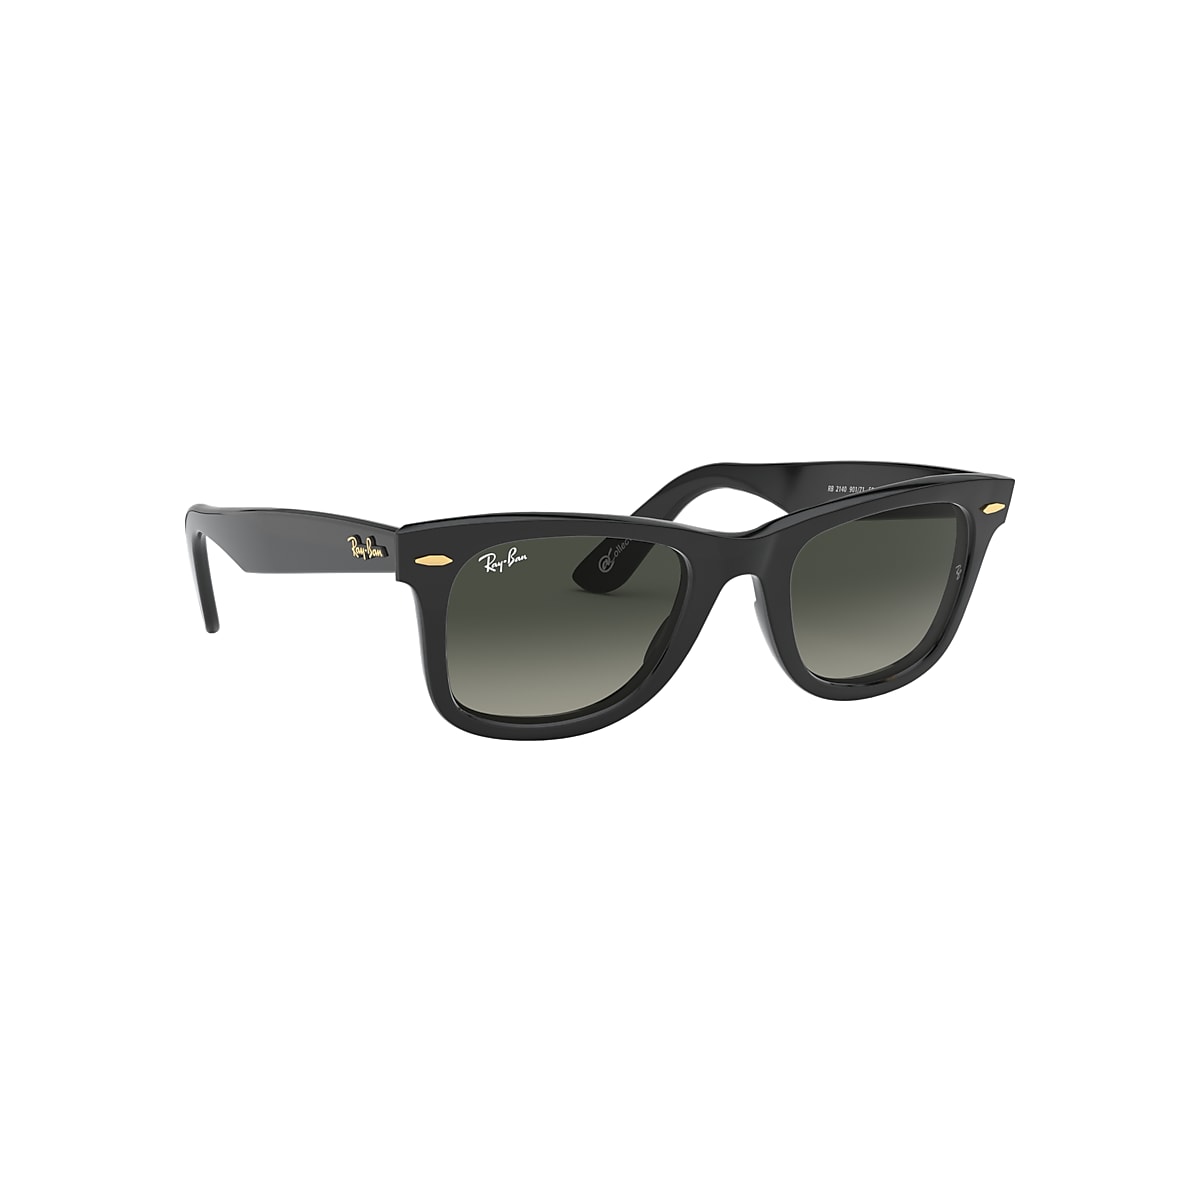 WAYFARER @COLLECTION in Black and Grey - RB2140 | Ray- Ban® US